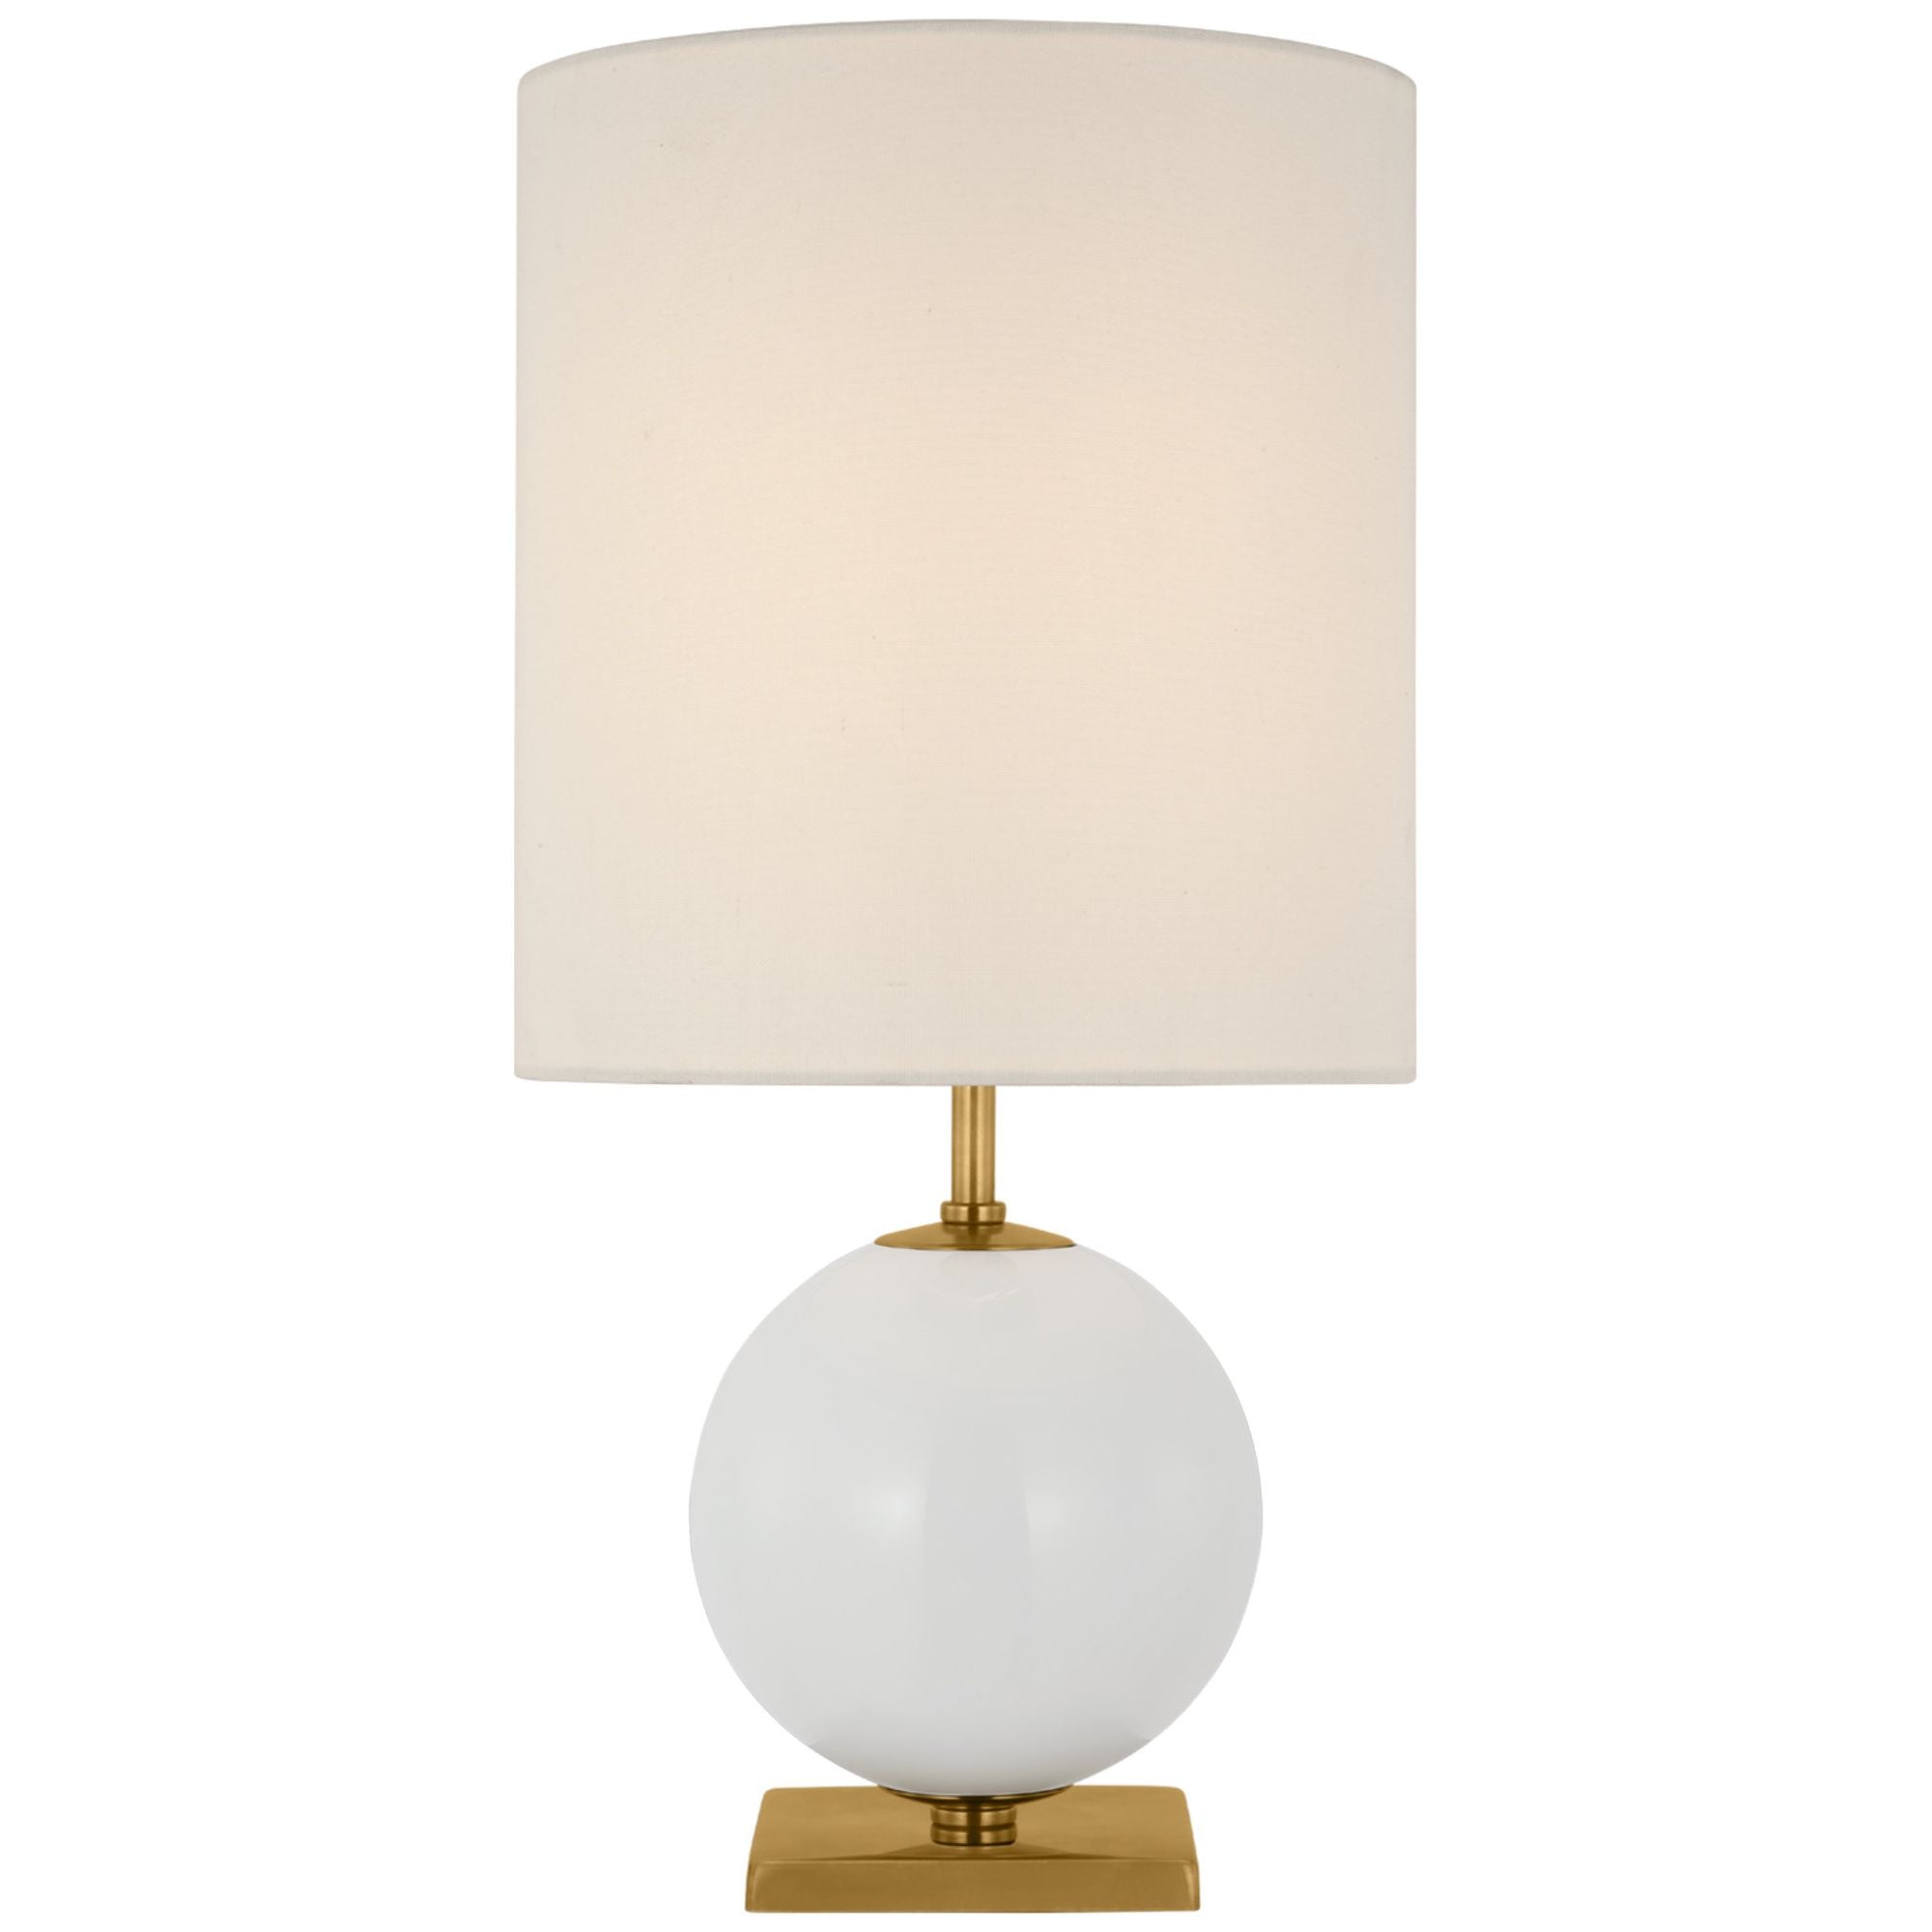 kate spade new york Elsie Small Table Lamp in Cream Painted Glass with Linen Shade